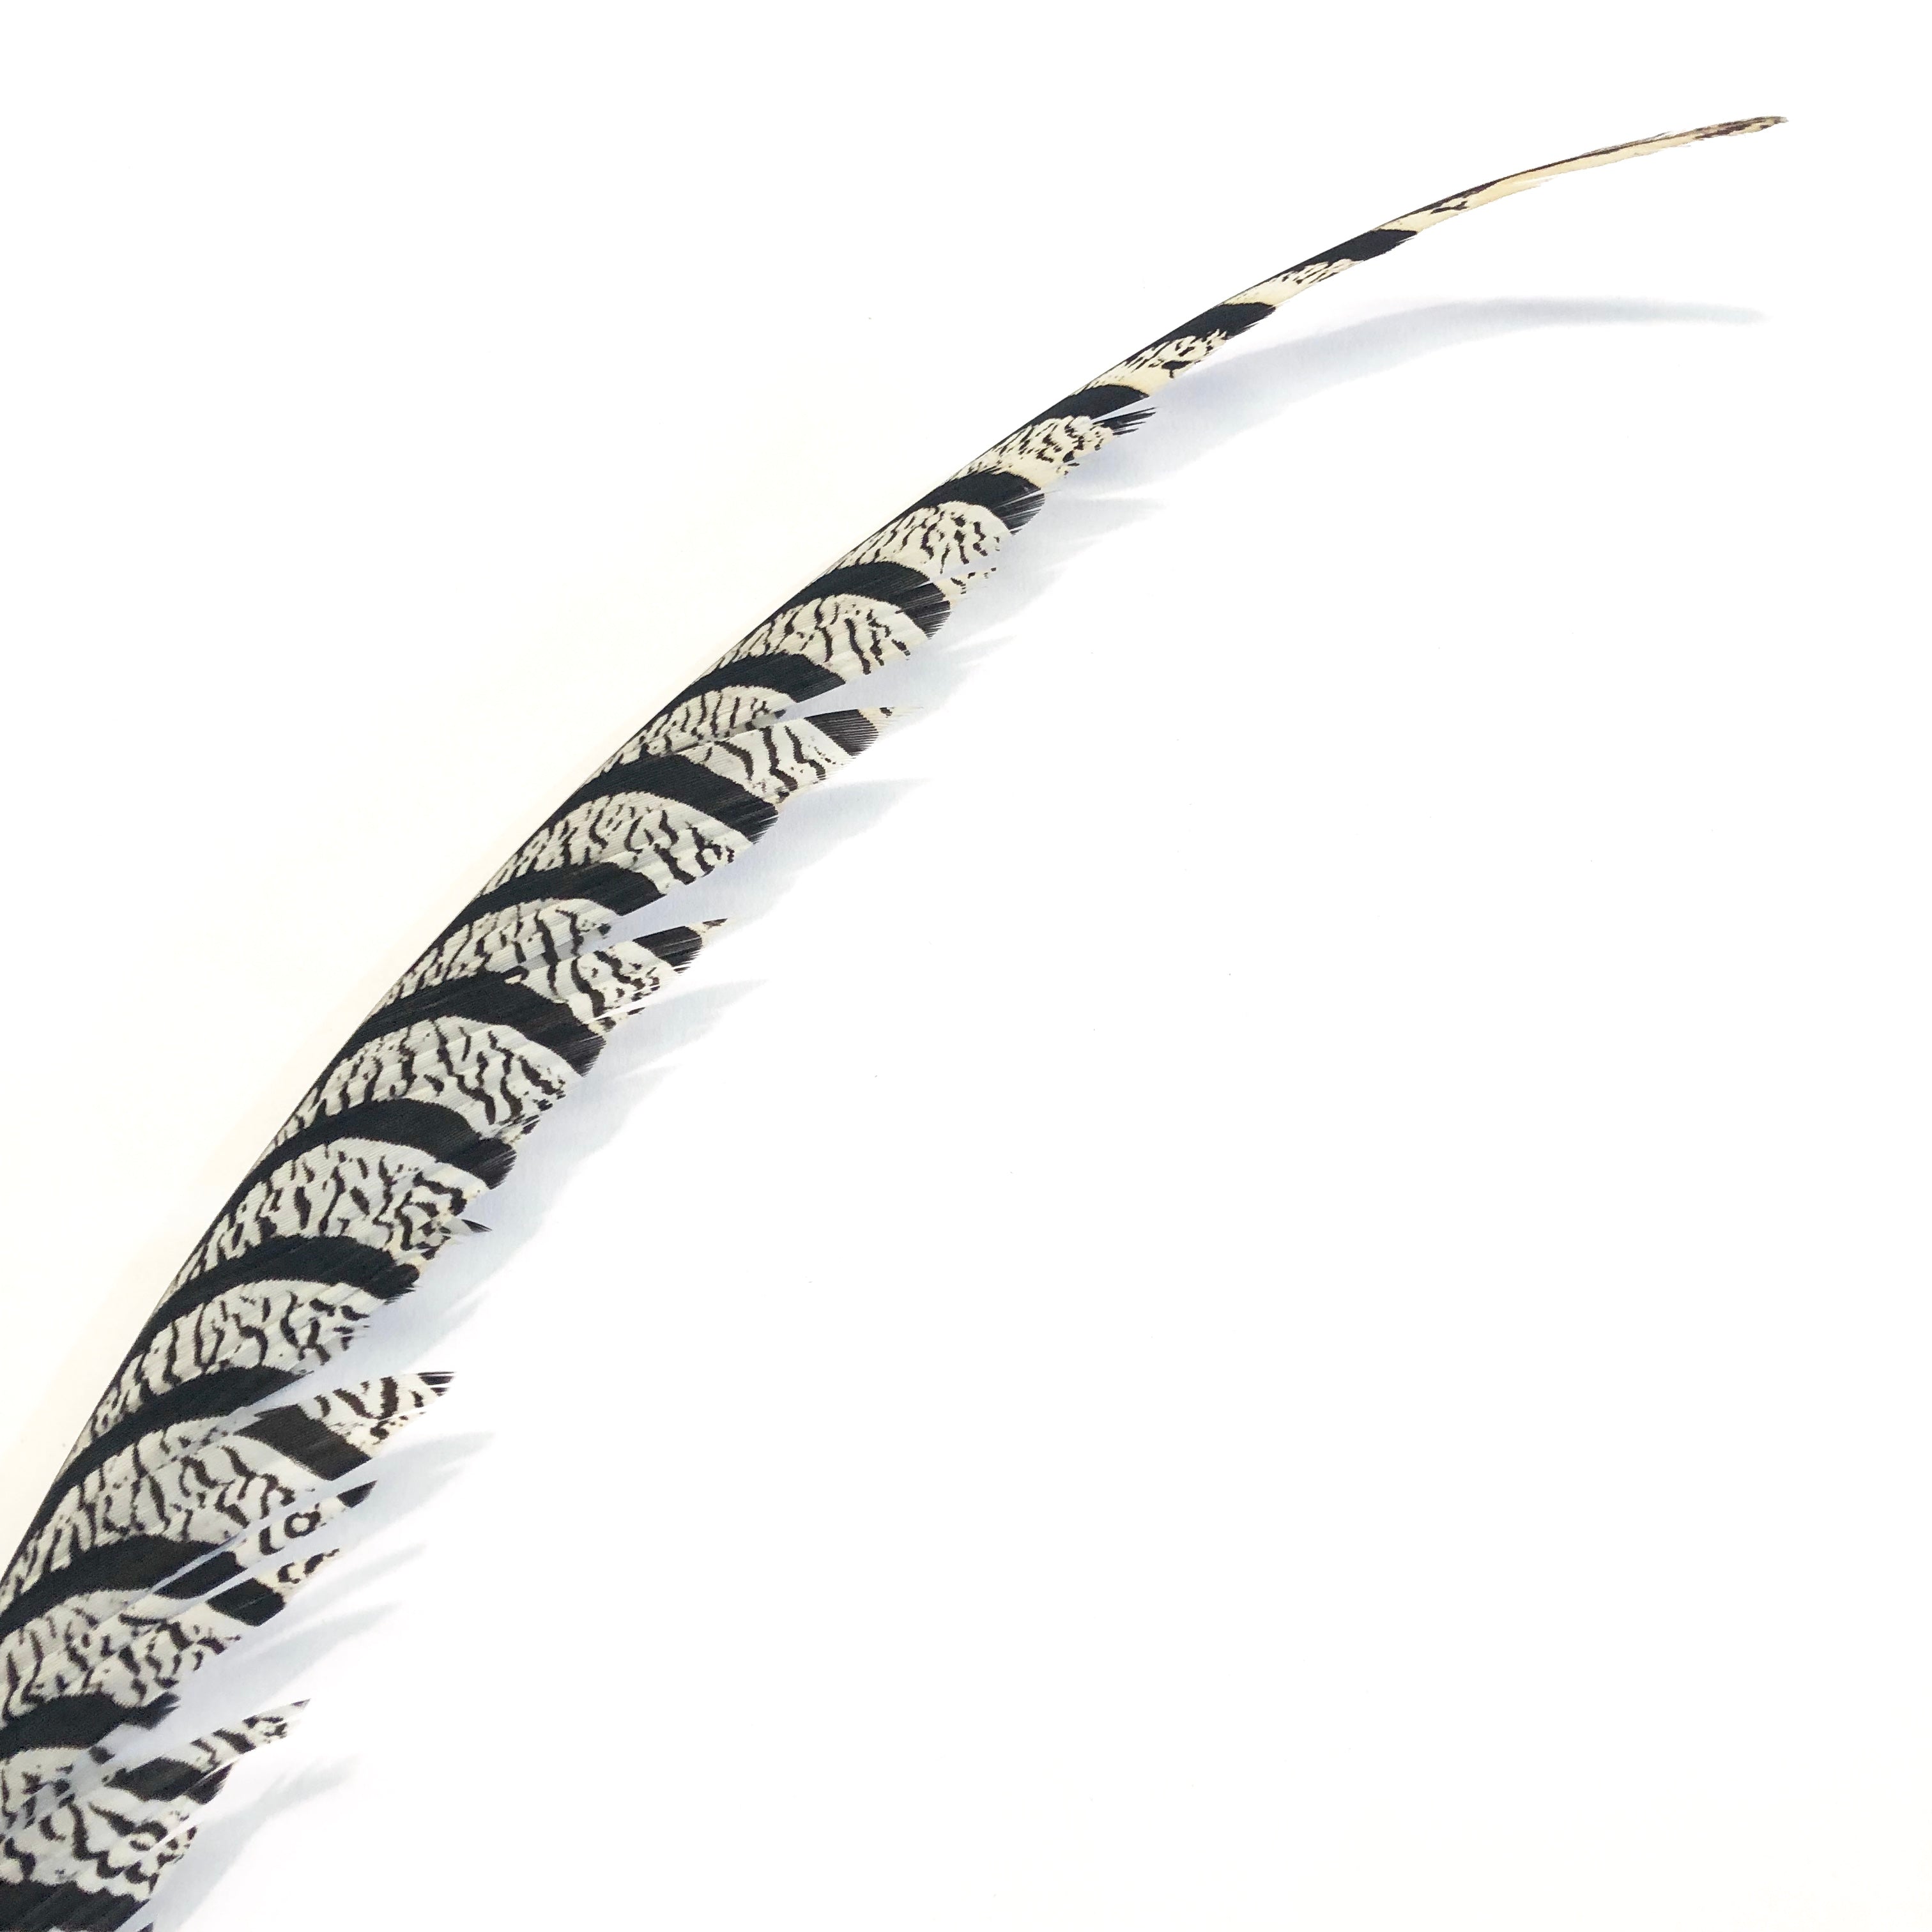 Lady Amherst Pheasant Centre Tail Feather - Natural